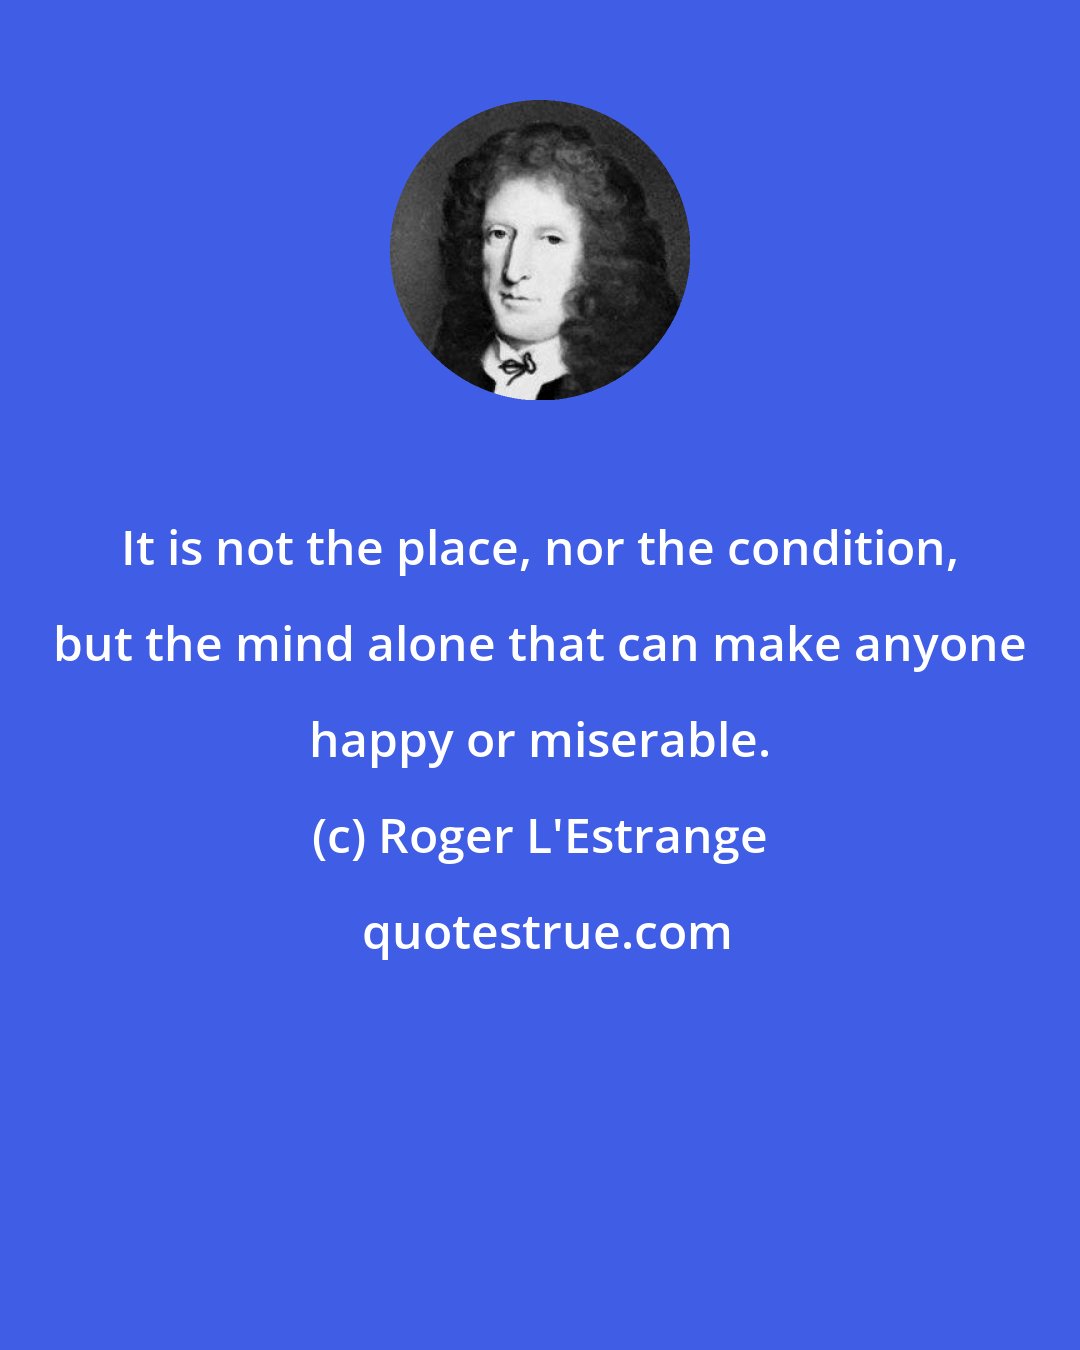 Roger L'Estrange: It is not the place, nor the condition, but the mind alone that can make anyone happy or miserable.